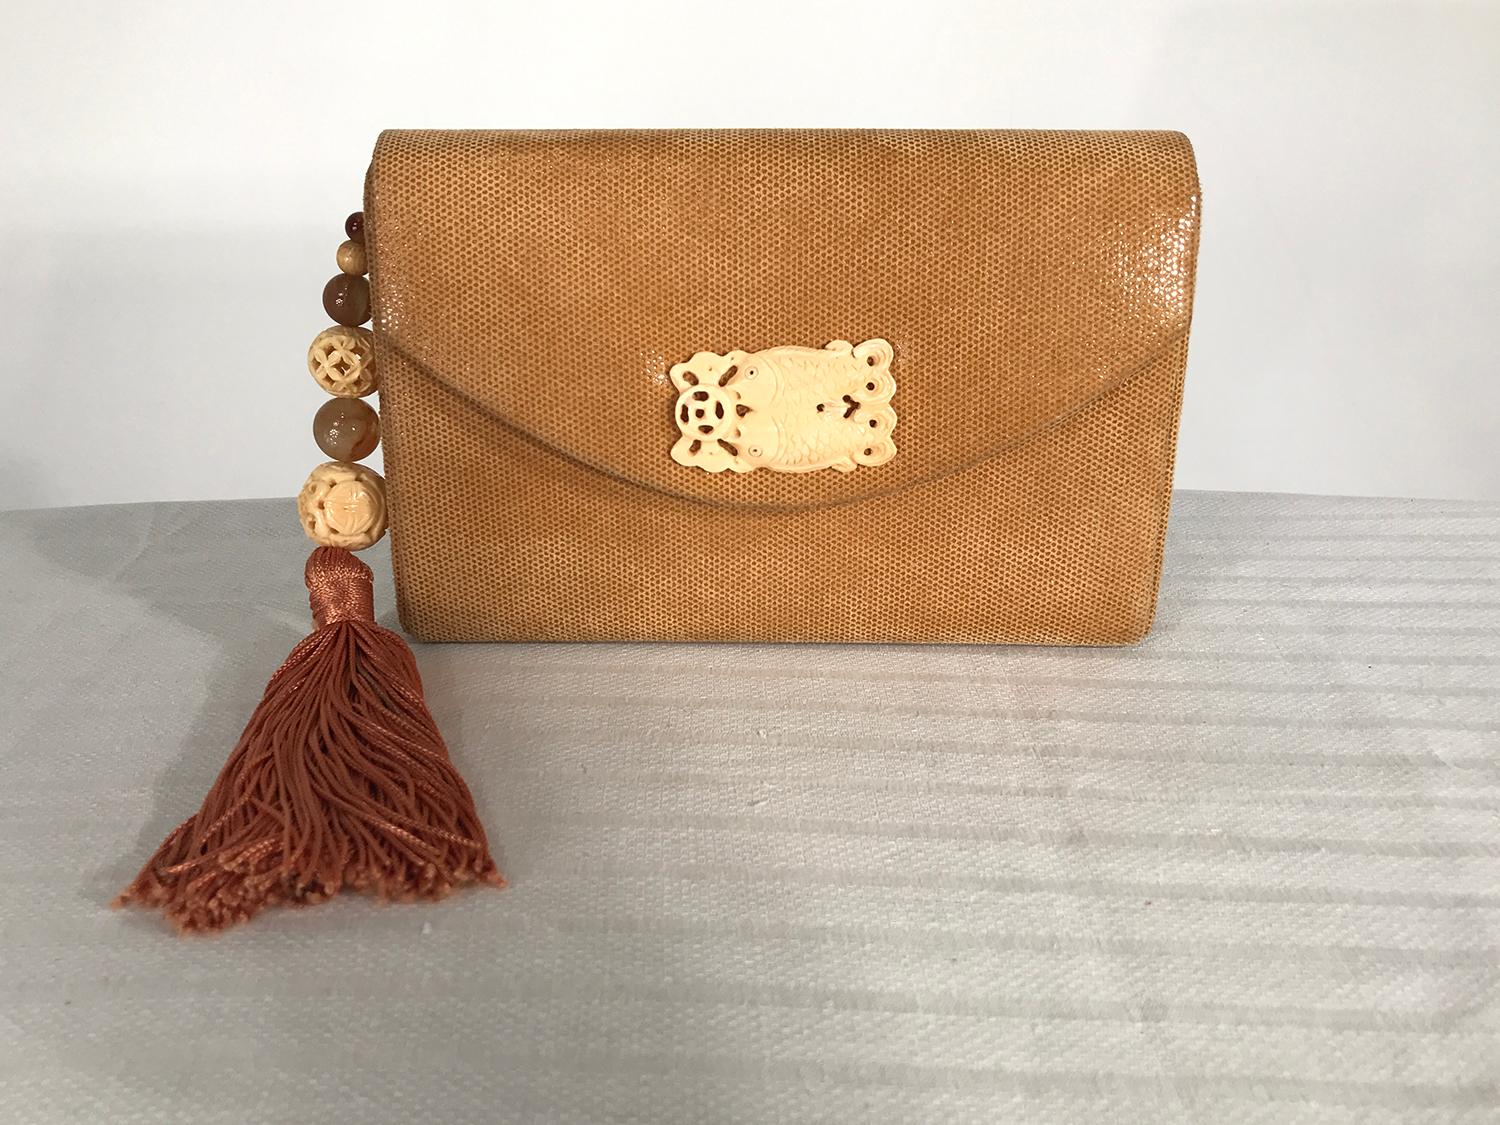 Rafael Sanchez golden honey comb suede, beaded tassel shoulder bag from the 1980s. Textured suede through a magnifying glass it looks like honey comb. Boxy shoulder bag, will hold an iPhone and more. Braided ivory/gold cord shoulder strap. Carved